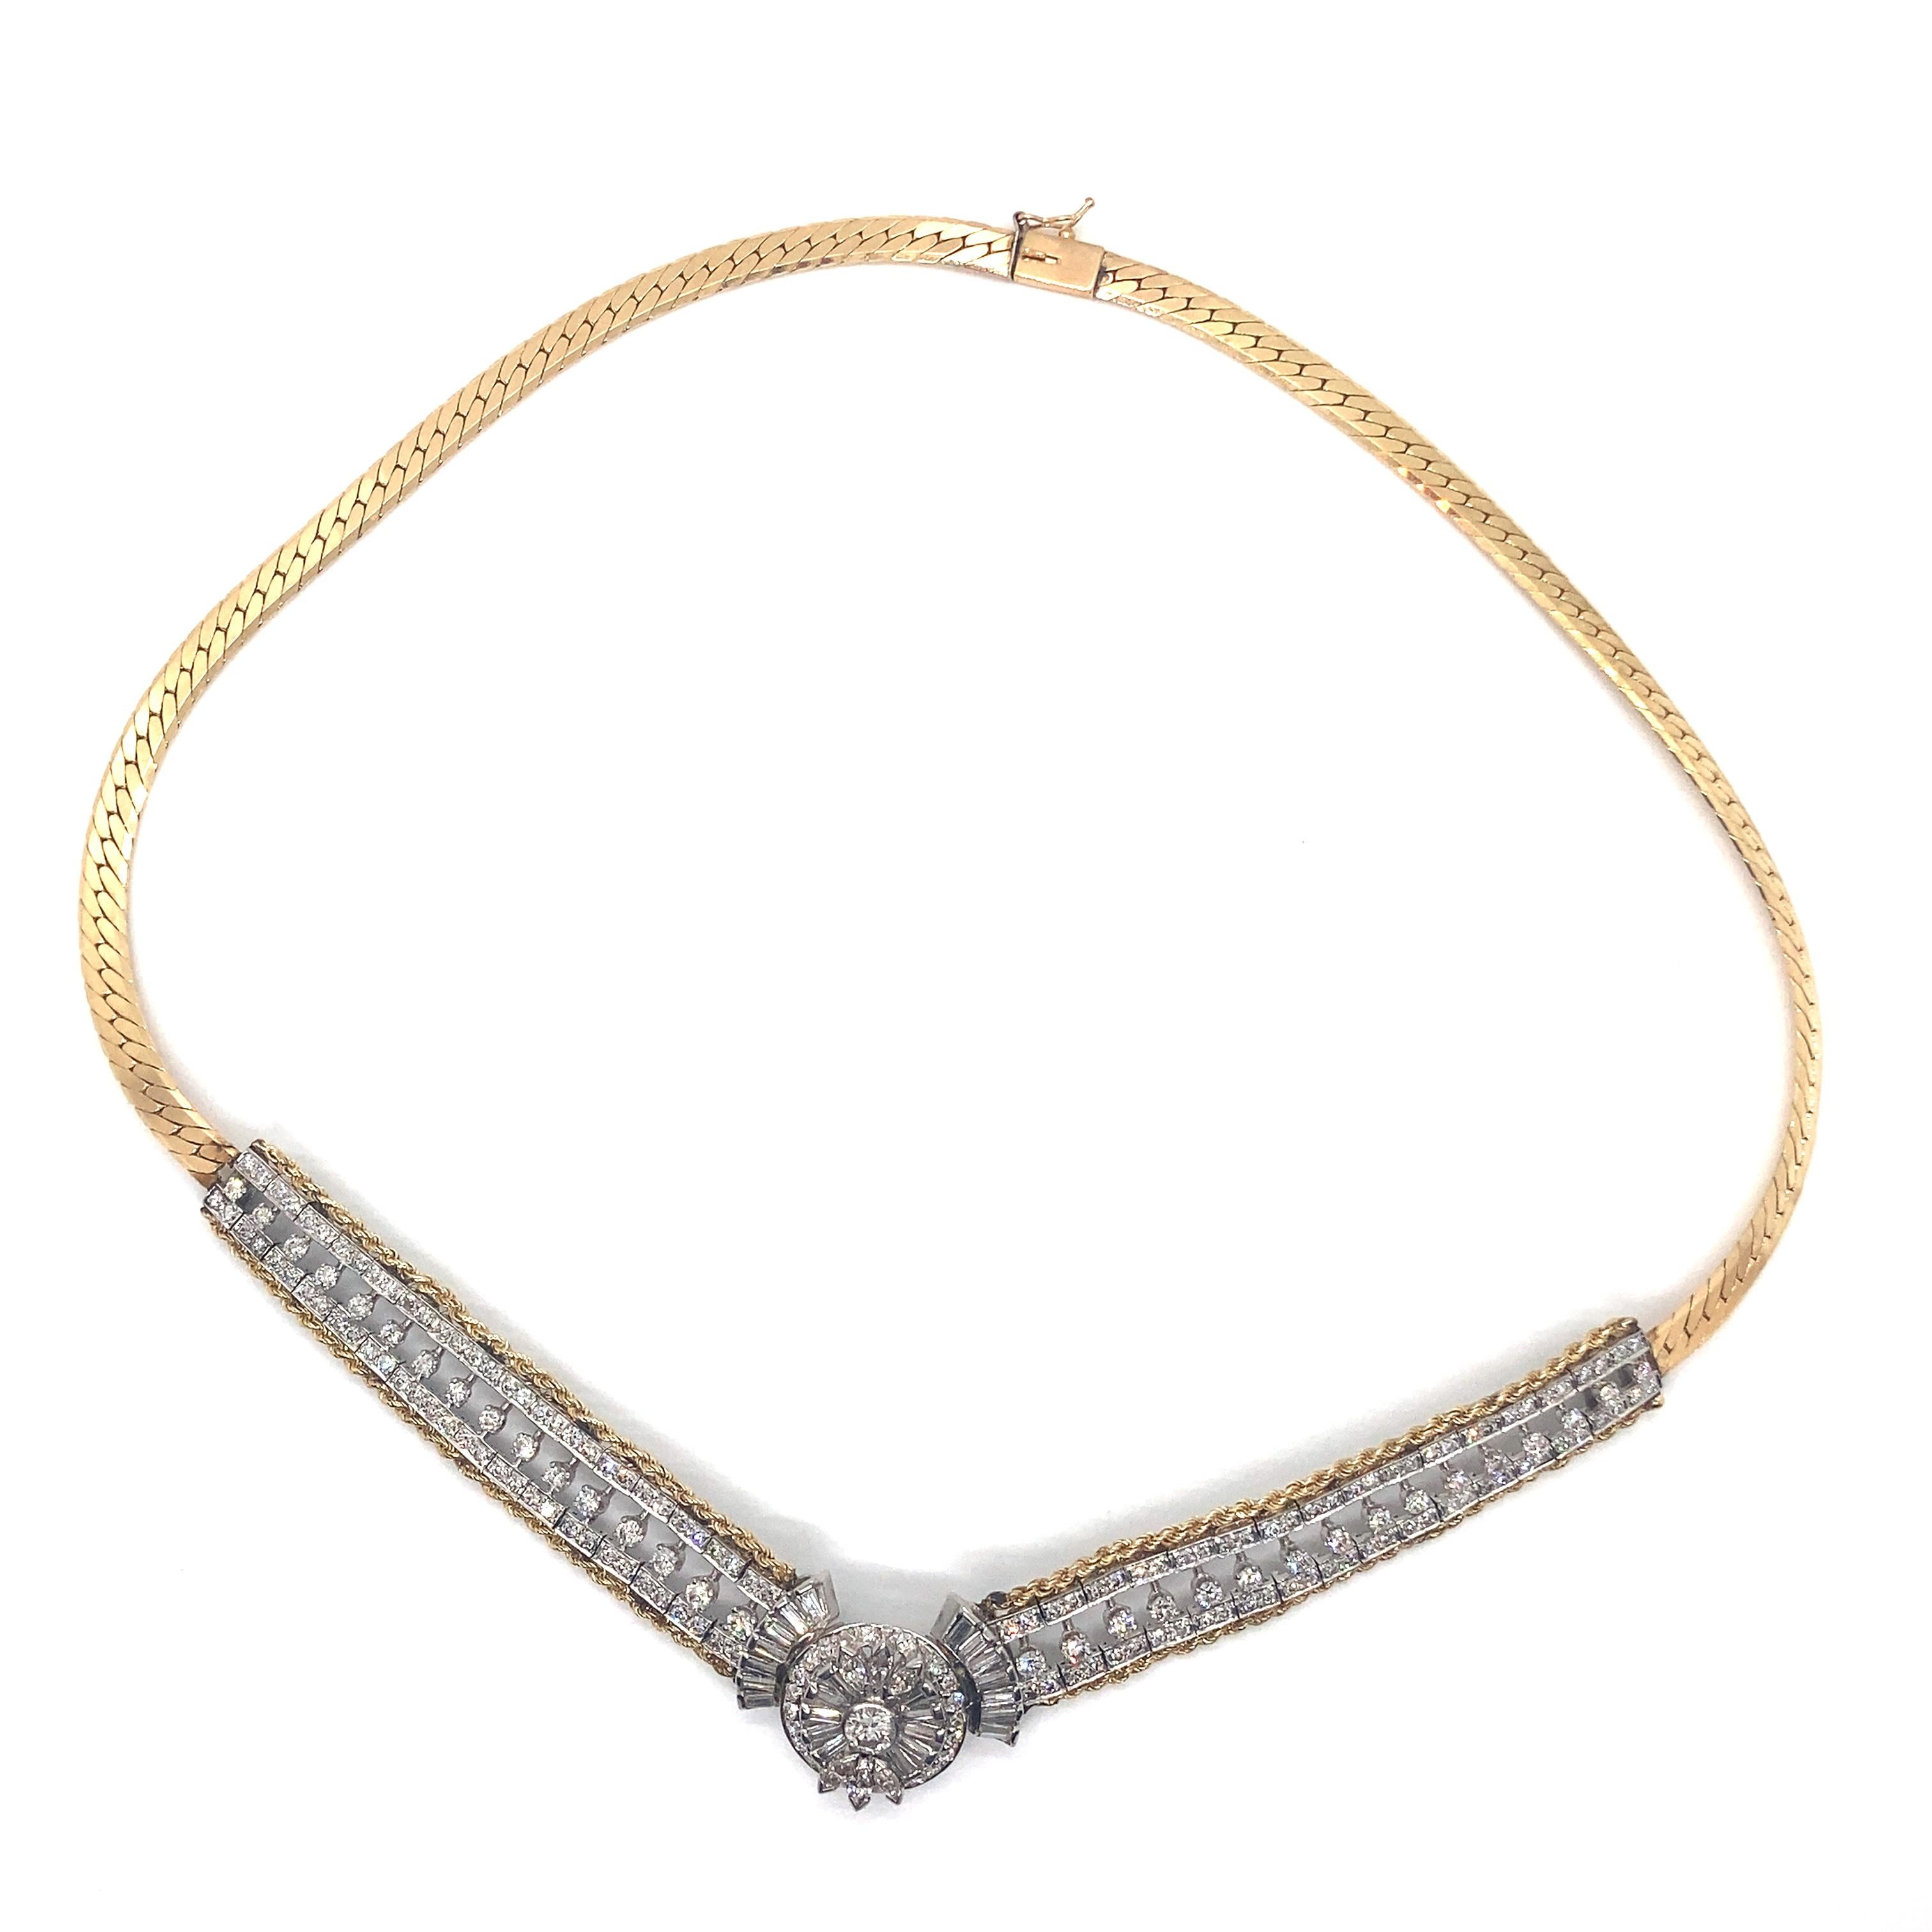 Vintage 1990's Chunky Statement Necklace With Diamonds - The necklace contains 181 round diamonds weighing approximately 4.80ct total weight, 6 marquises weighing approximately .50ct total weight and 24 straight baguette diamonds weighing .75ct